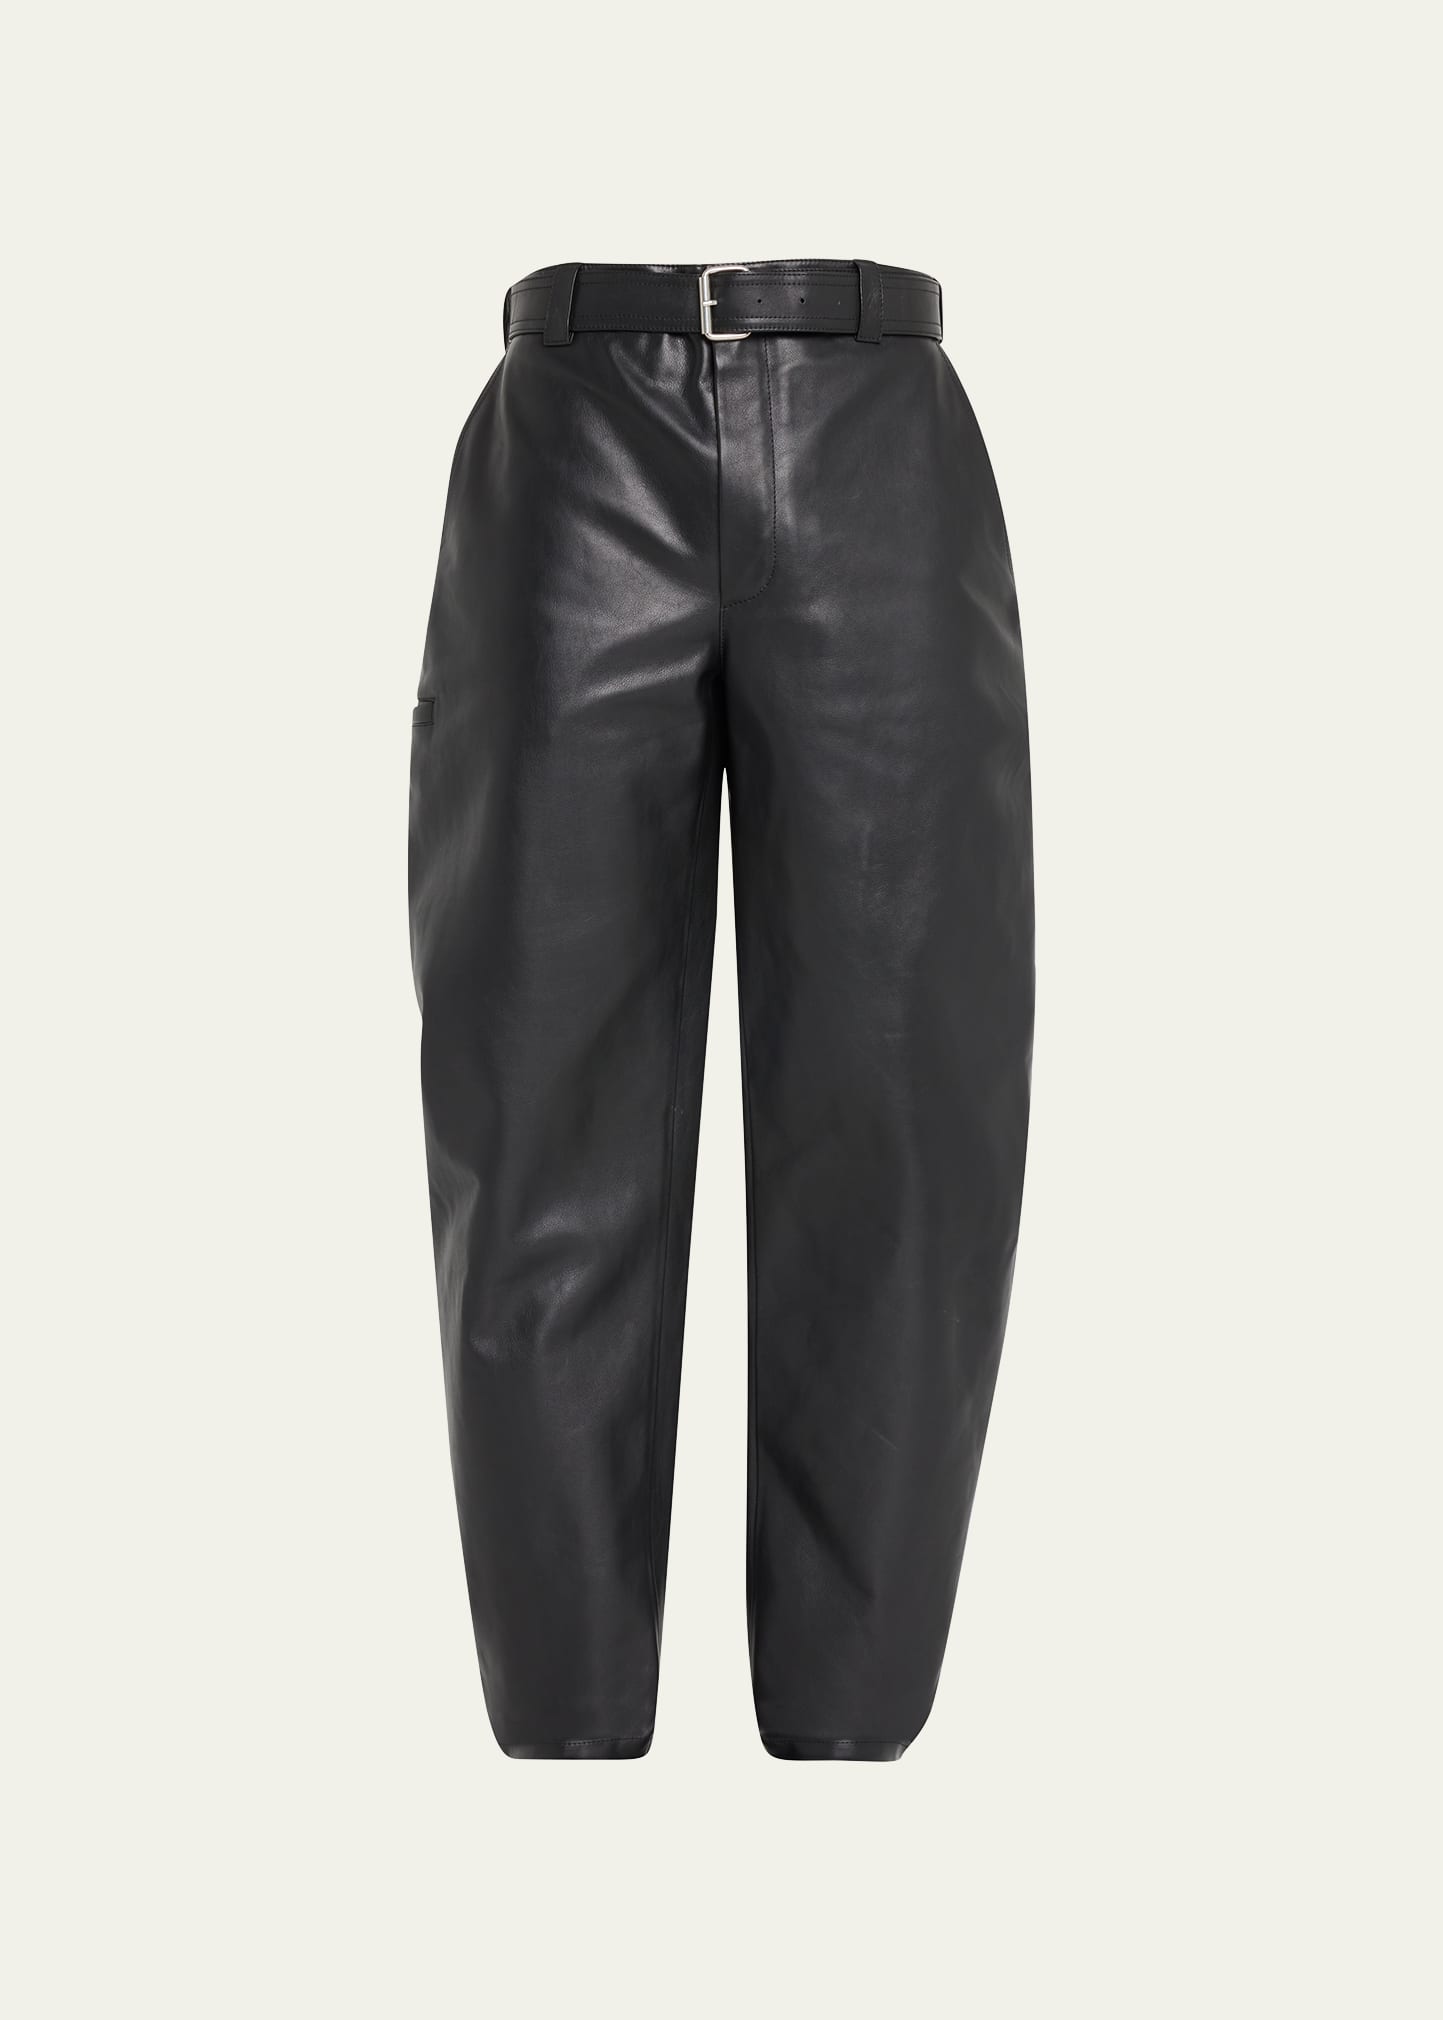 Men's Belted Leather Curved-Leg Trousers